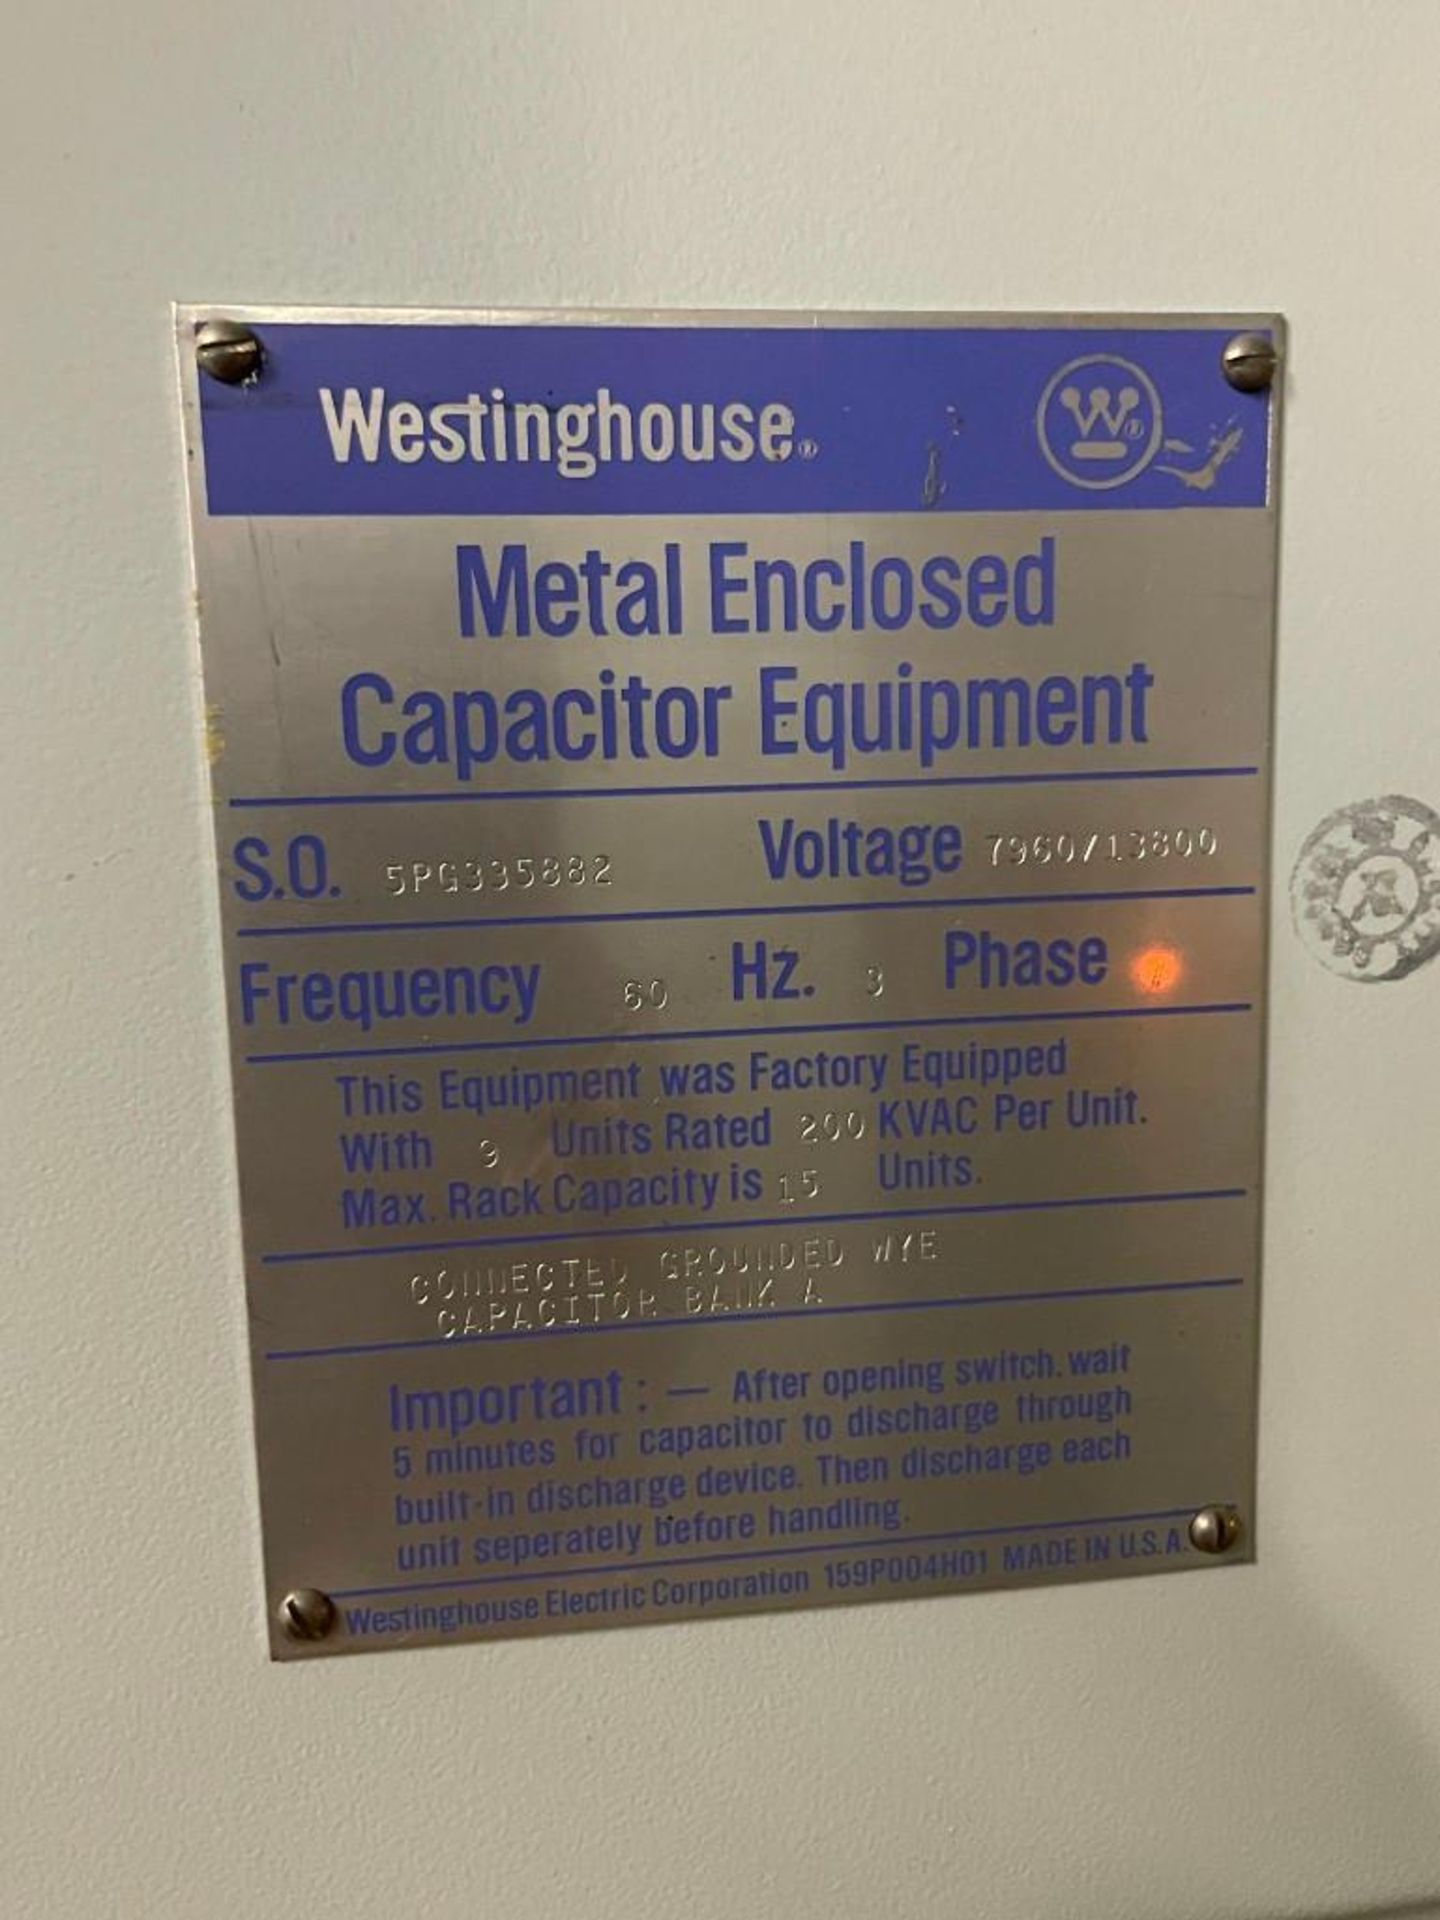 Westinghouse Metal Enclosed Capacitor Equipment - Image 9 of 9